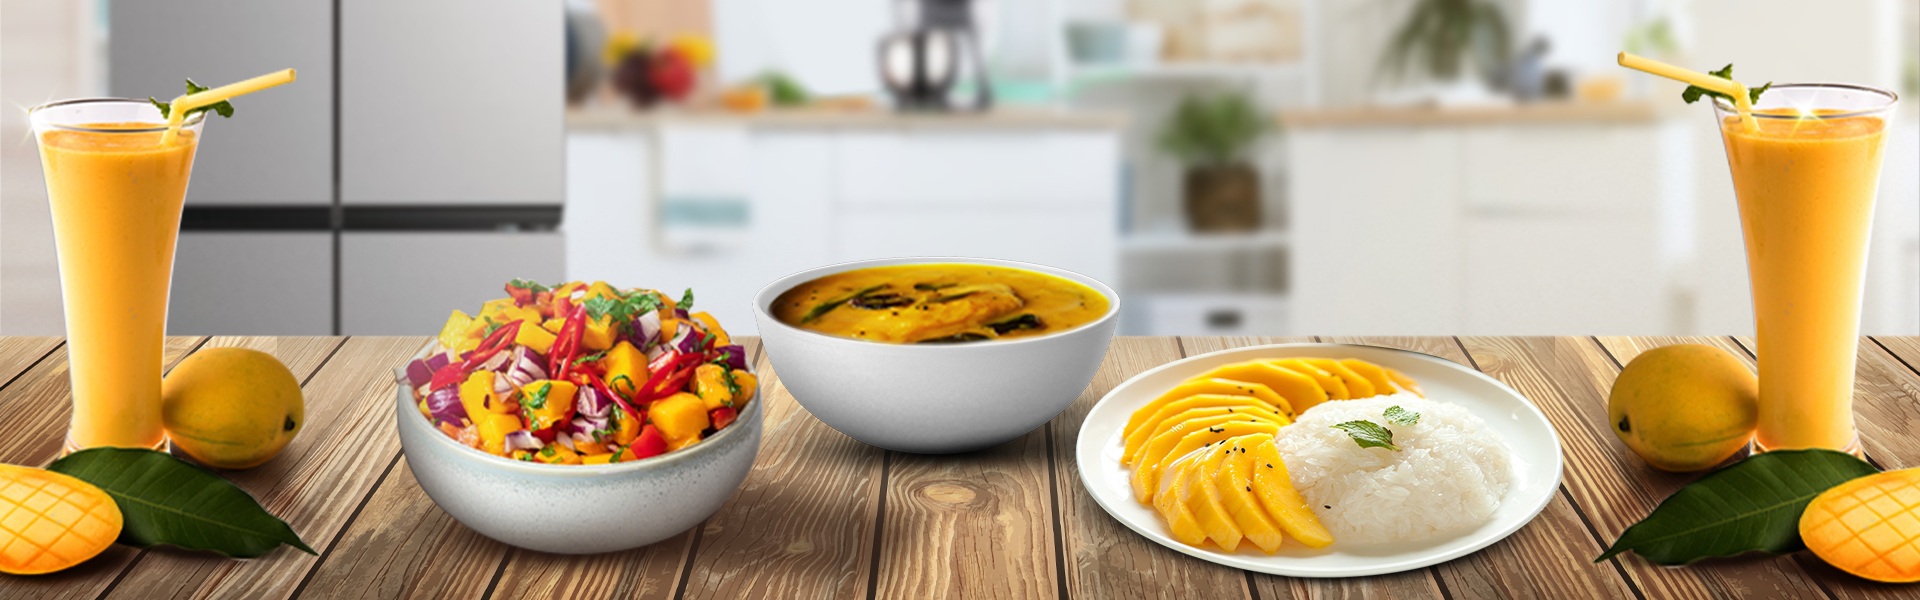 Different Mango recipes kept on the kitchen countertop